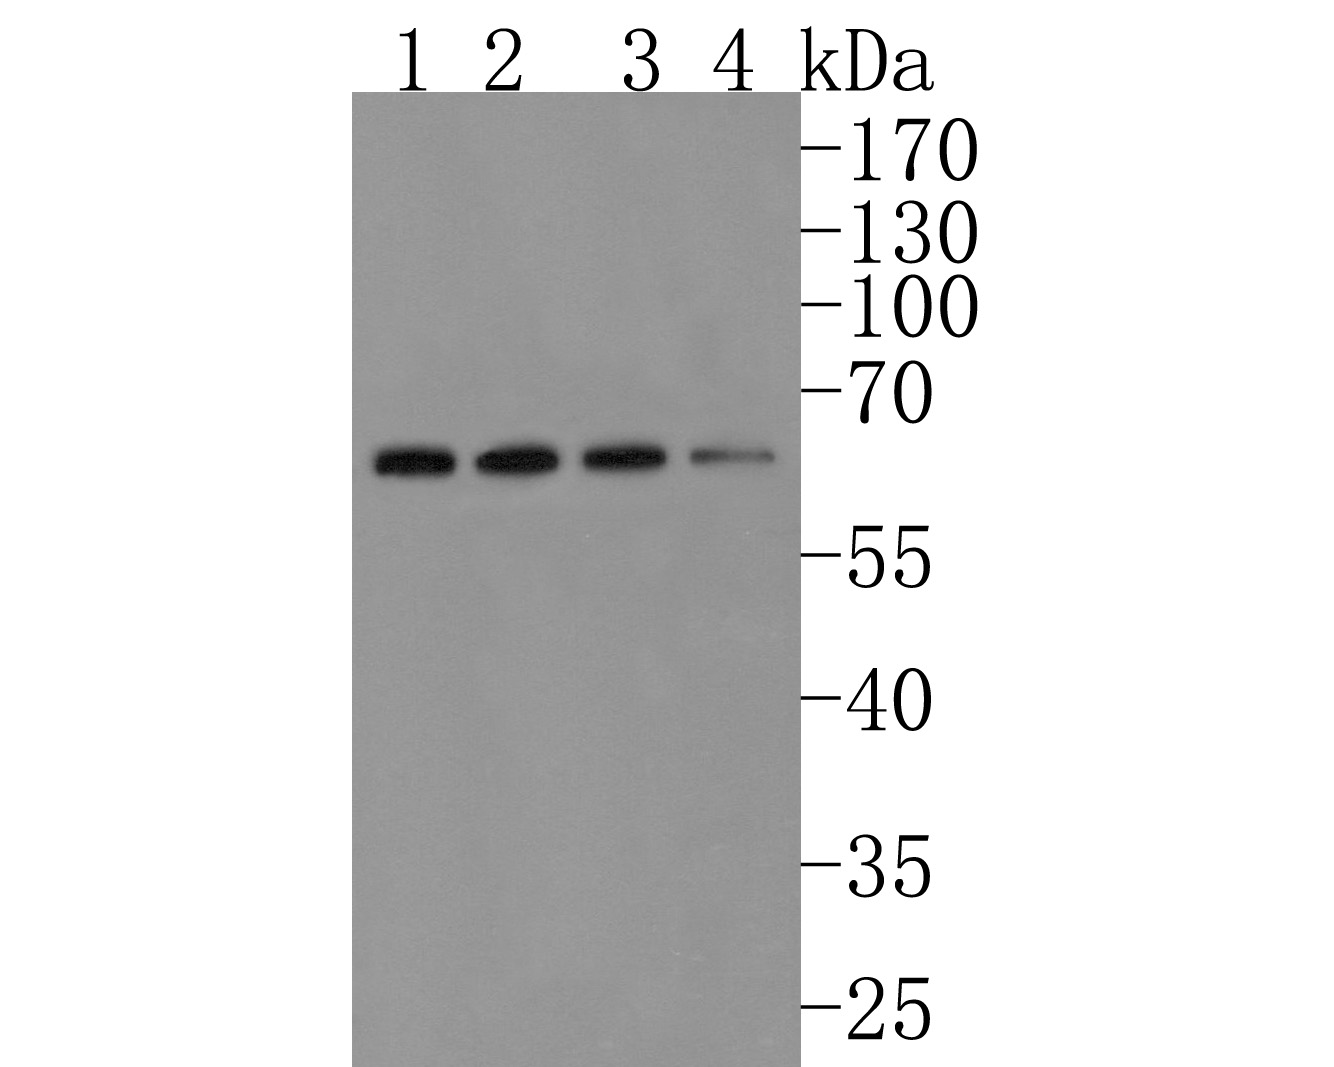 Western blot analysis of alpha 1a Adrenergic Receptor on different lysates. Proteins were transferred to a PVDF membrane and blocked with 5% NFDM/TBST for 1 hour at room temperature. The primary antibody (HA720096, 1/500) was used in 5% NFDM/TBST at room temperature for 2 hours. Goat Anti-Rabbit IgG - HRP Secondary Antibody (HA1001) at 1:200,000 dilution was used for 1 hour at room temperature.<br />
Positive control: <br />
Lane 1: Jurkat cell lysate<br />
Lane 2: SH-SY5Y cell lysate<br />
Lane 3: PC-3M cell lysate<br />
Lane 4: Mouse lung tissue lysate